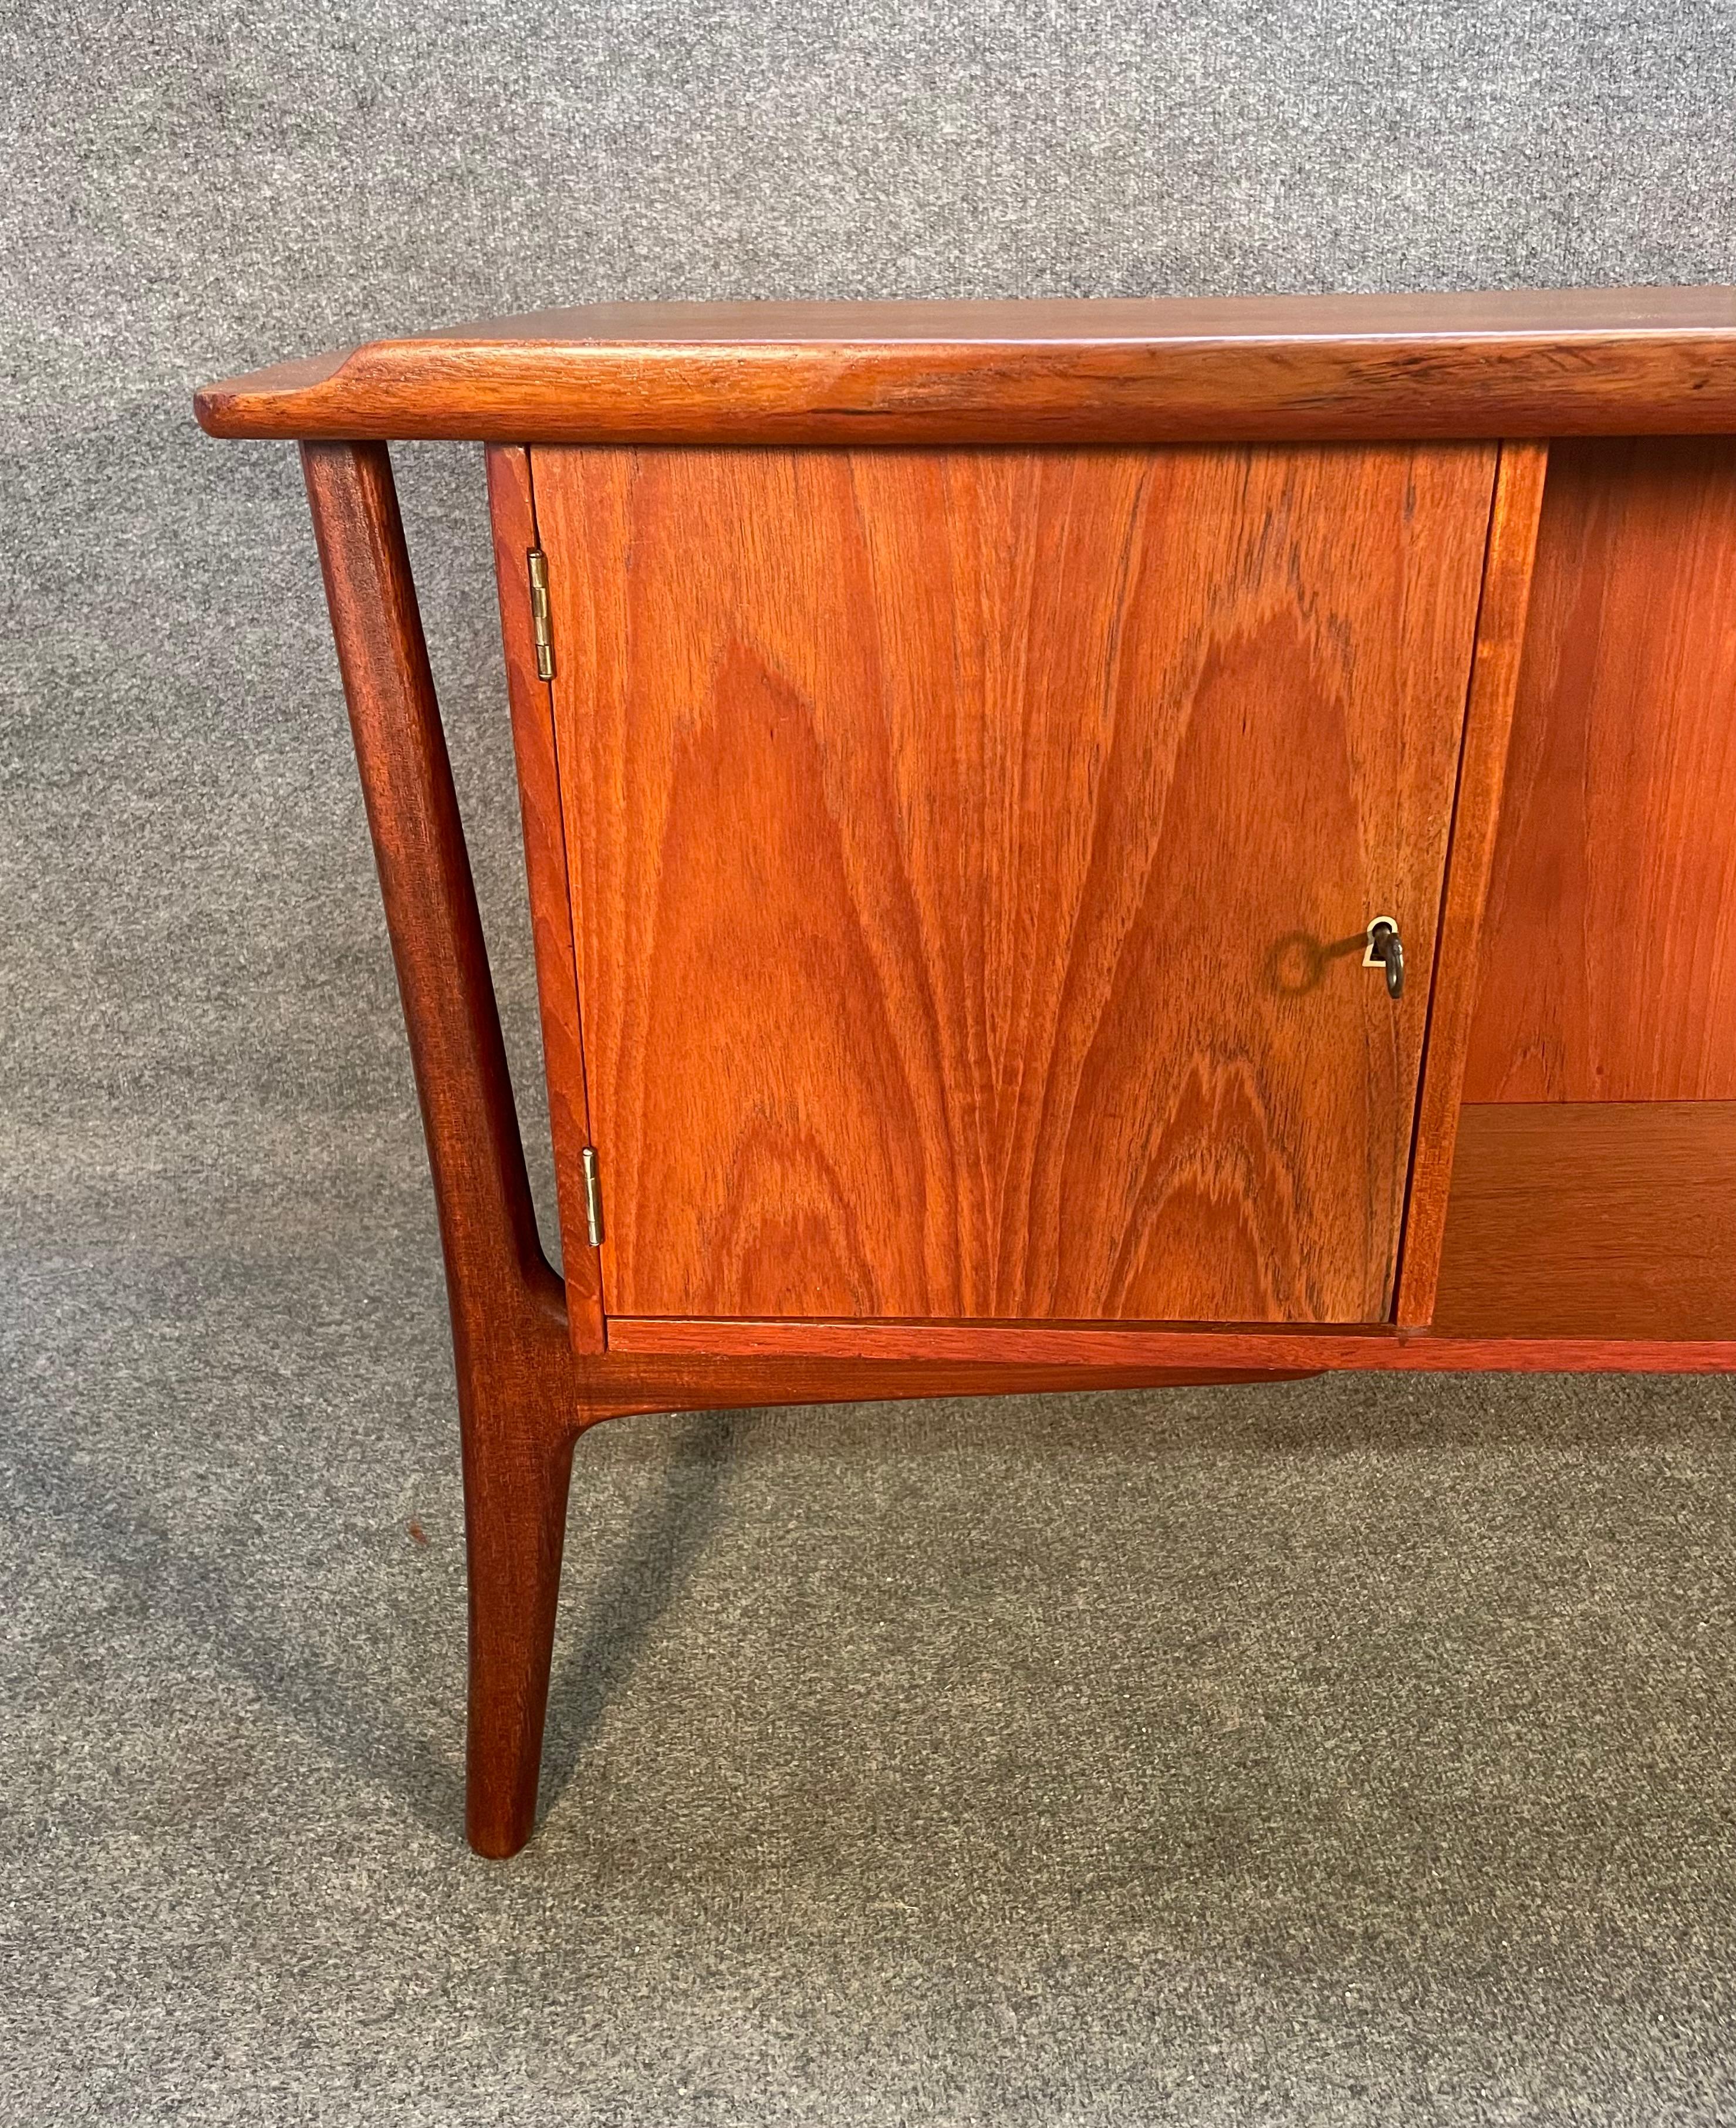 Here is a beautiful and sought after scandinavian modern executive desk in teak wood designed by Svend Madsen and manufactured by HP Hansen in Denmark in the 1960's.
This special desk, recently imported from Europe to California before its